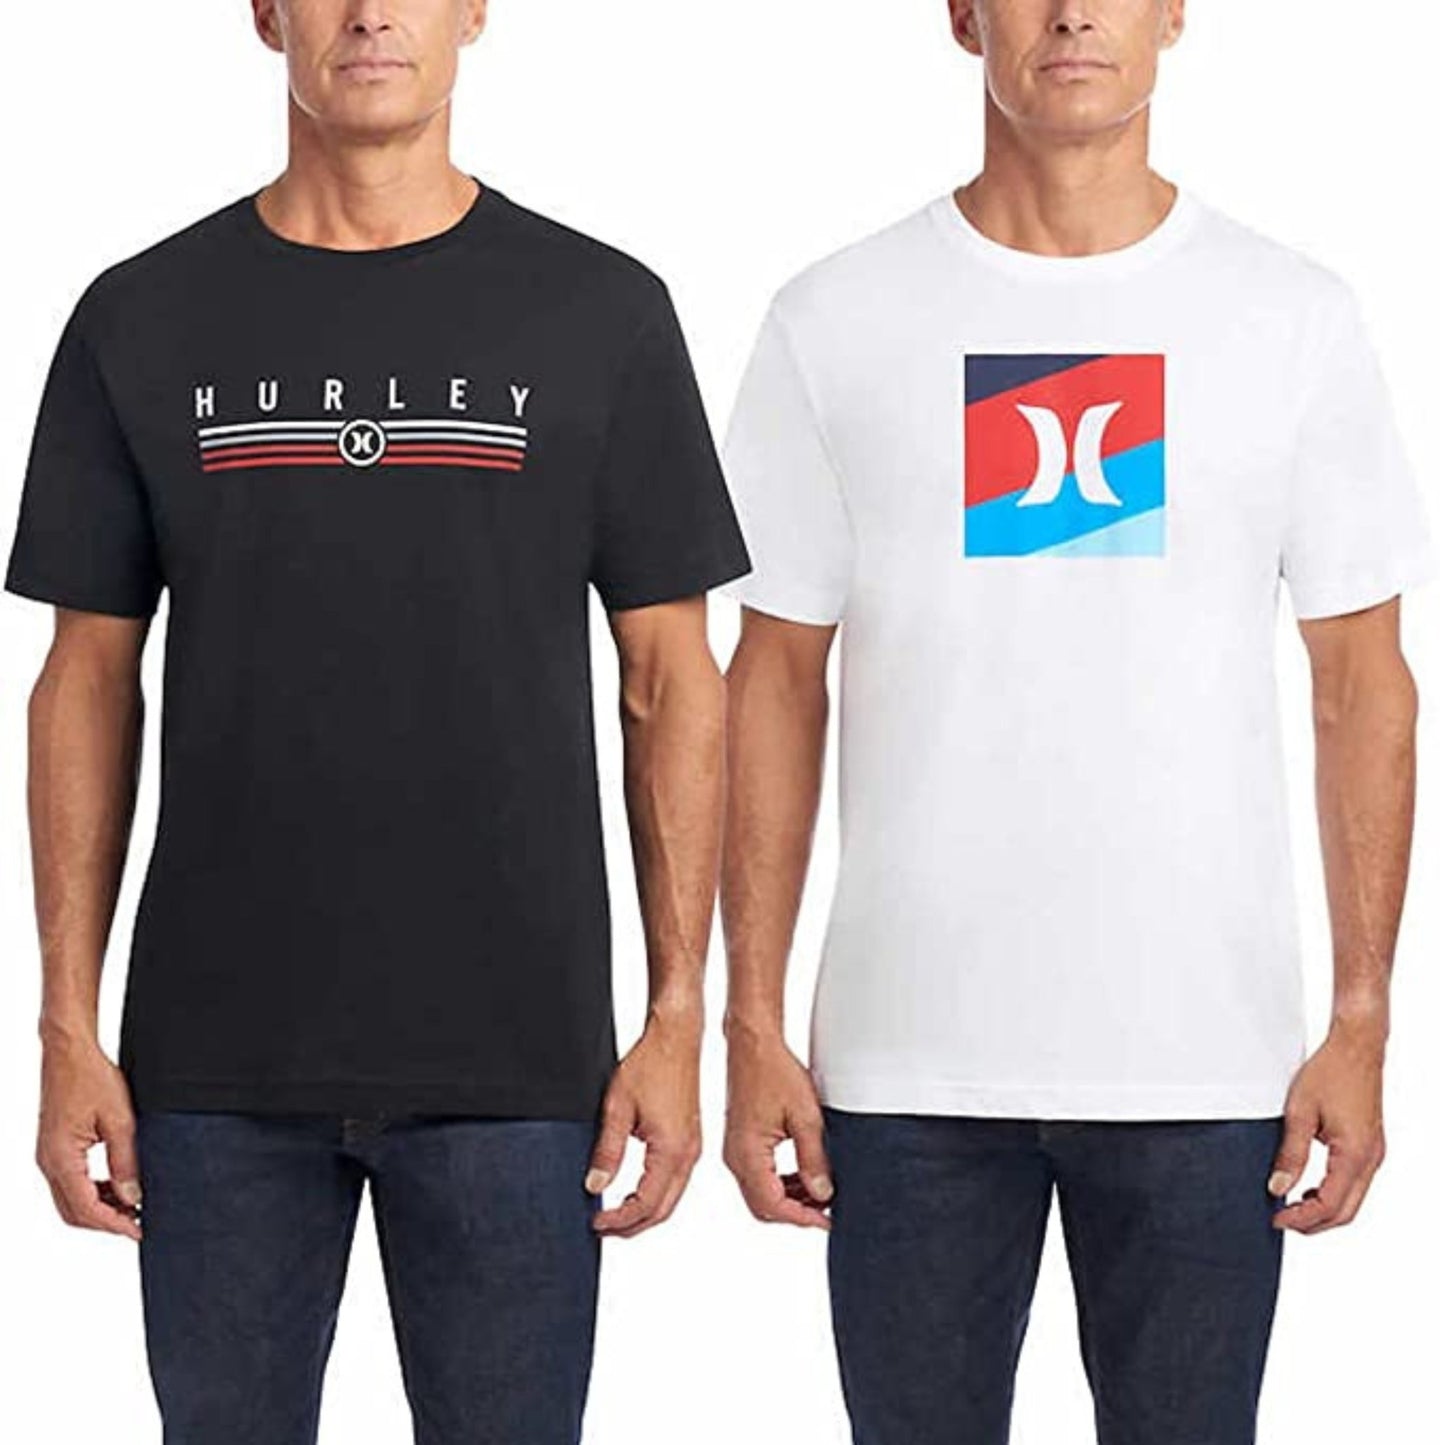 Hurley Men's 2 Pack Classic Graphic Tees (Black/White)